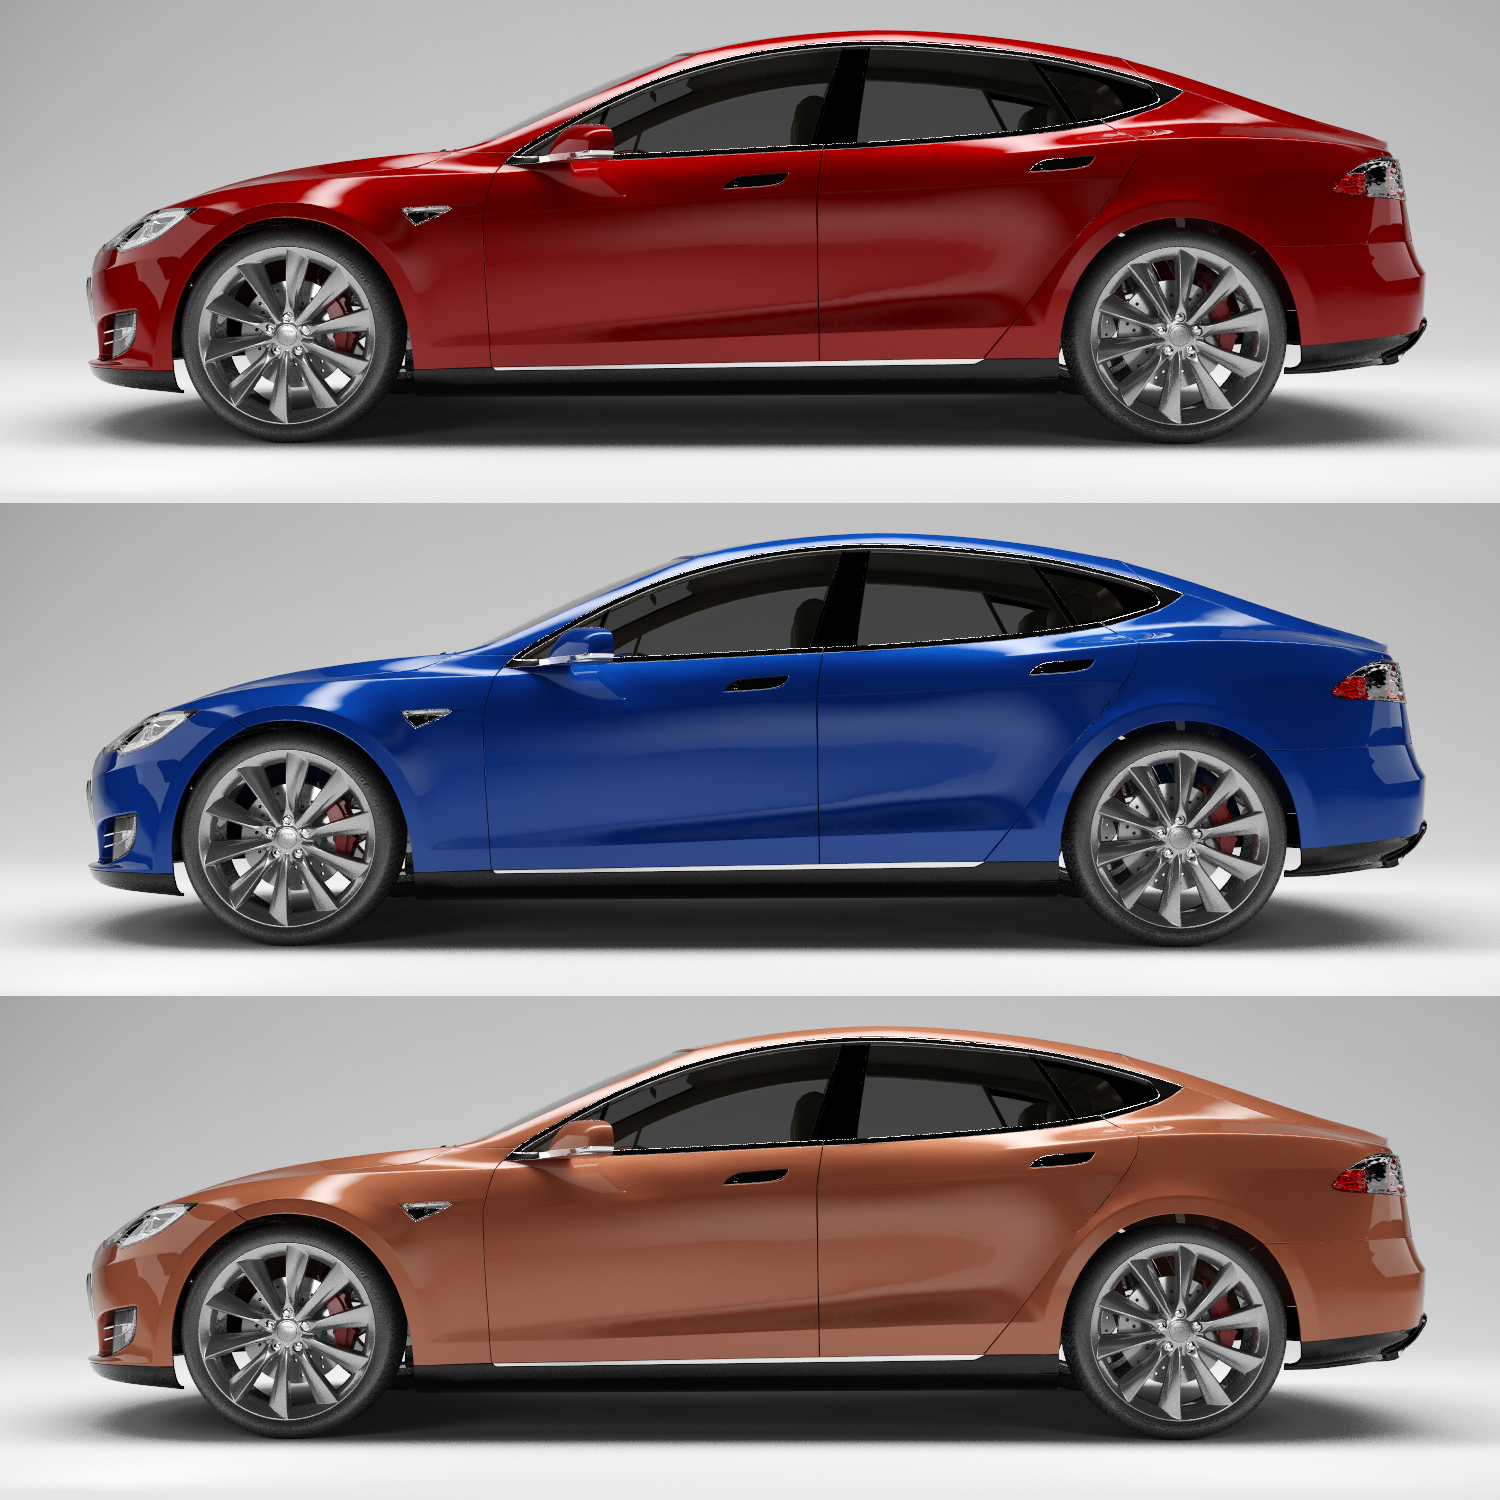 Tesla Model S 6 Colors By Continentcgs 3docean Effy Moom Free Coloring Picture wallpaper give a chance to color on the wall without getting in trouble! Fill the walls of your home or office with stress-relieving [effymoom.blogspot.com]